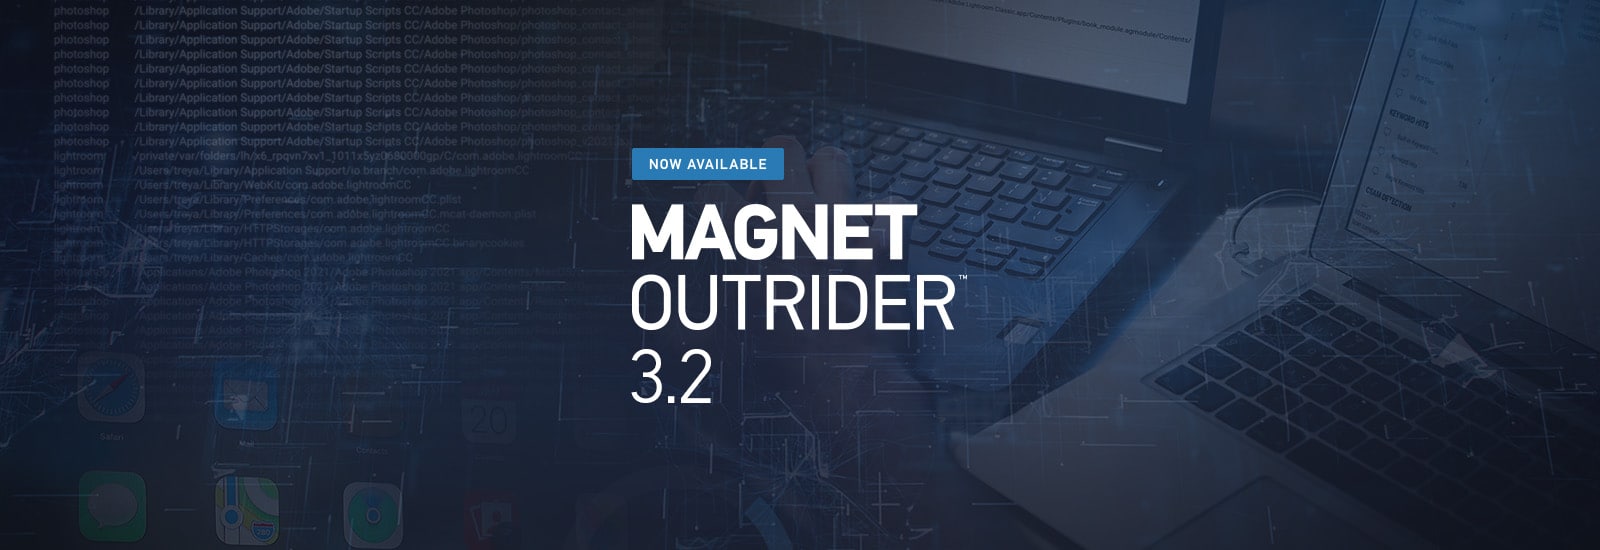 A decorative header for the Magnet OUTRIDER 3.2 release